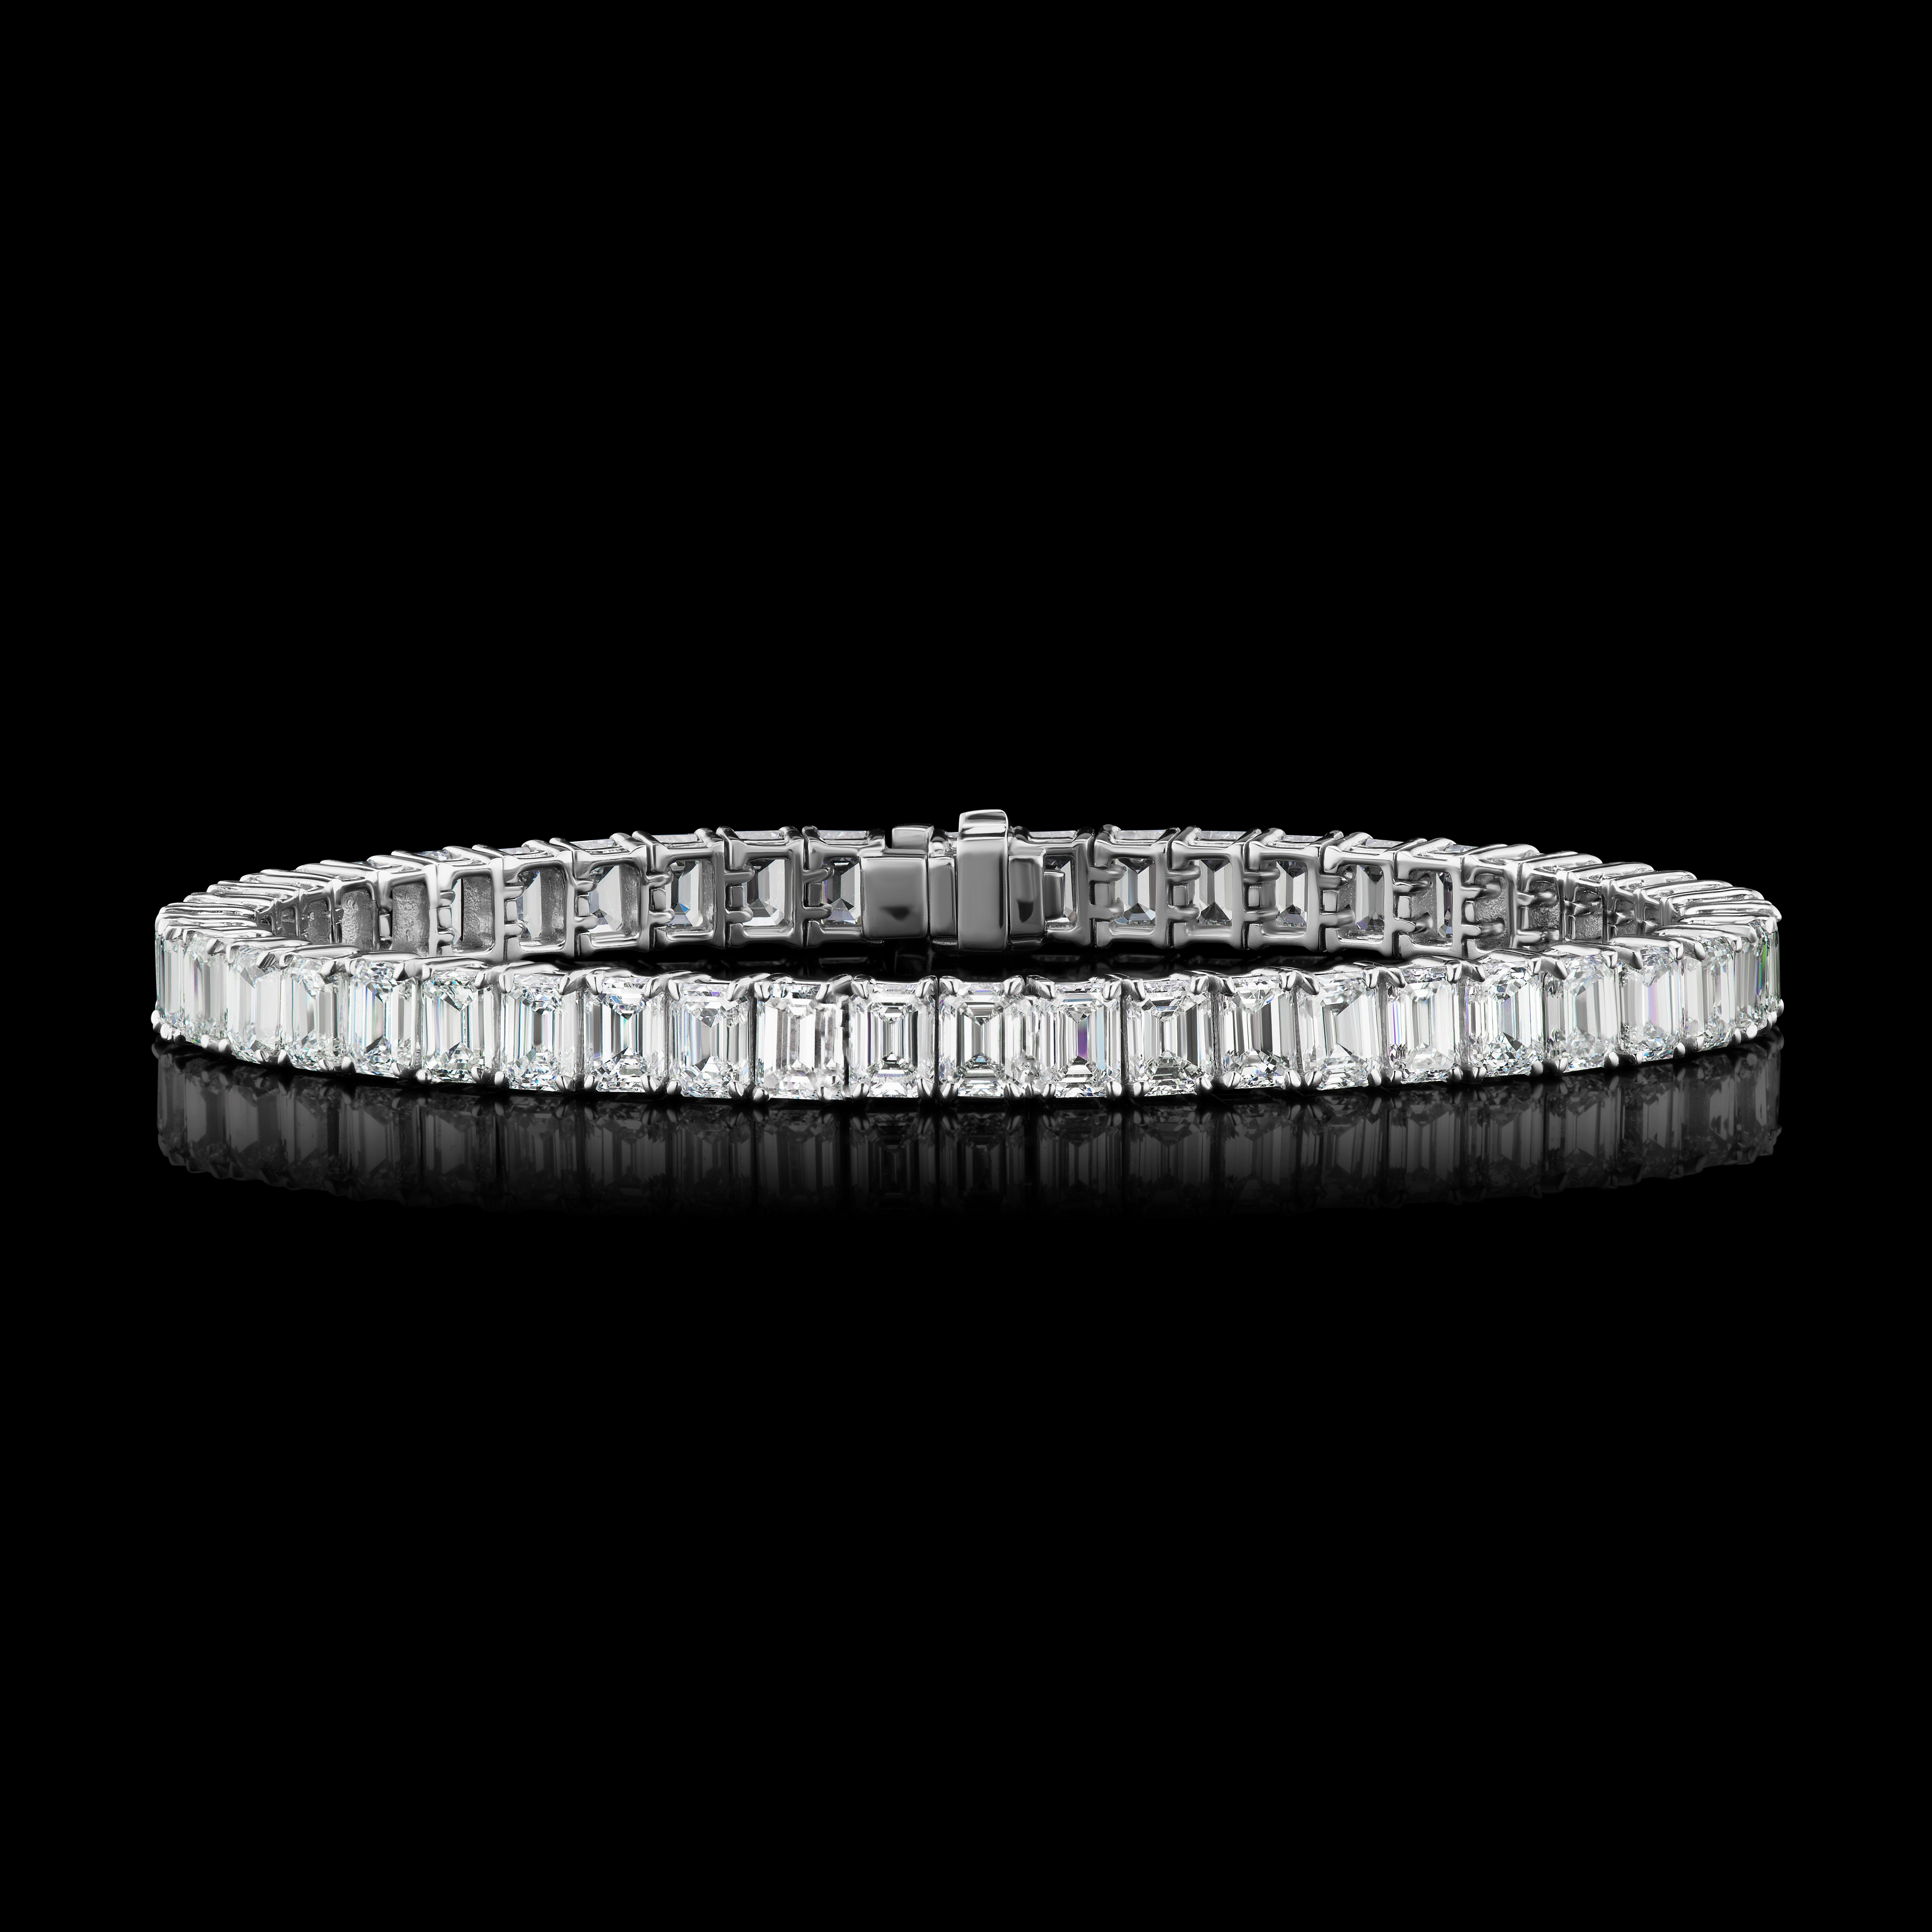 Classic Emerald Diamond Straight Line Bracelet in 18K White Gold ( 18.72 ct. tw. )

This diamond bracelet is made using Emerald diamonds which are elegantly set in a straight line, which gives it a very elegant look. Made with matching 48 Emerald